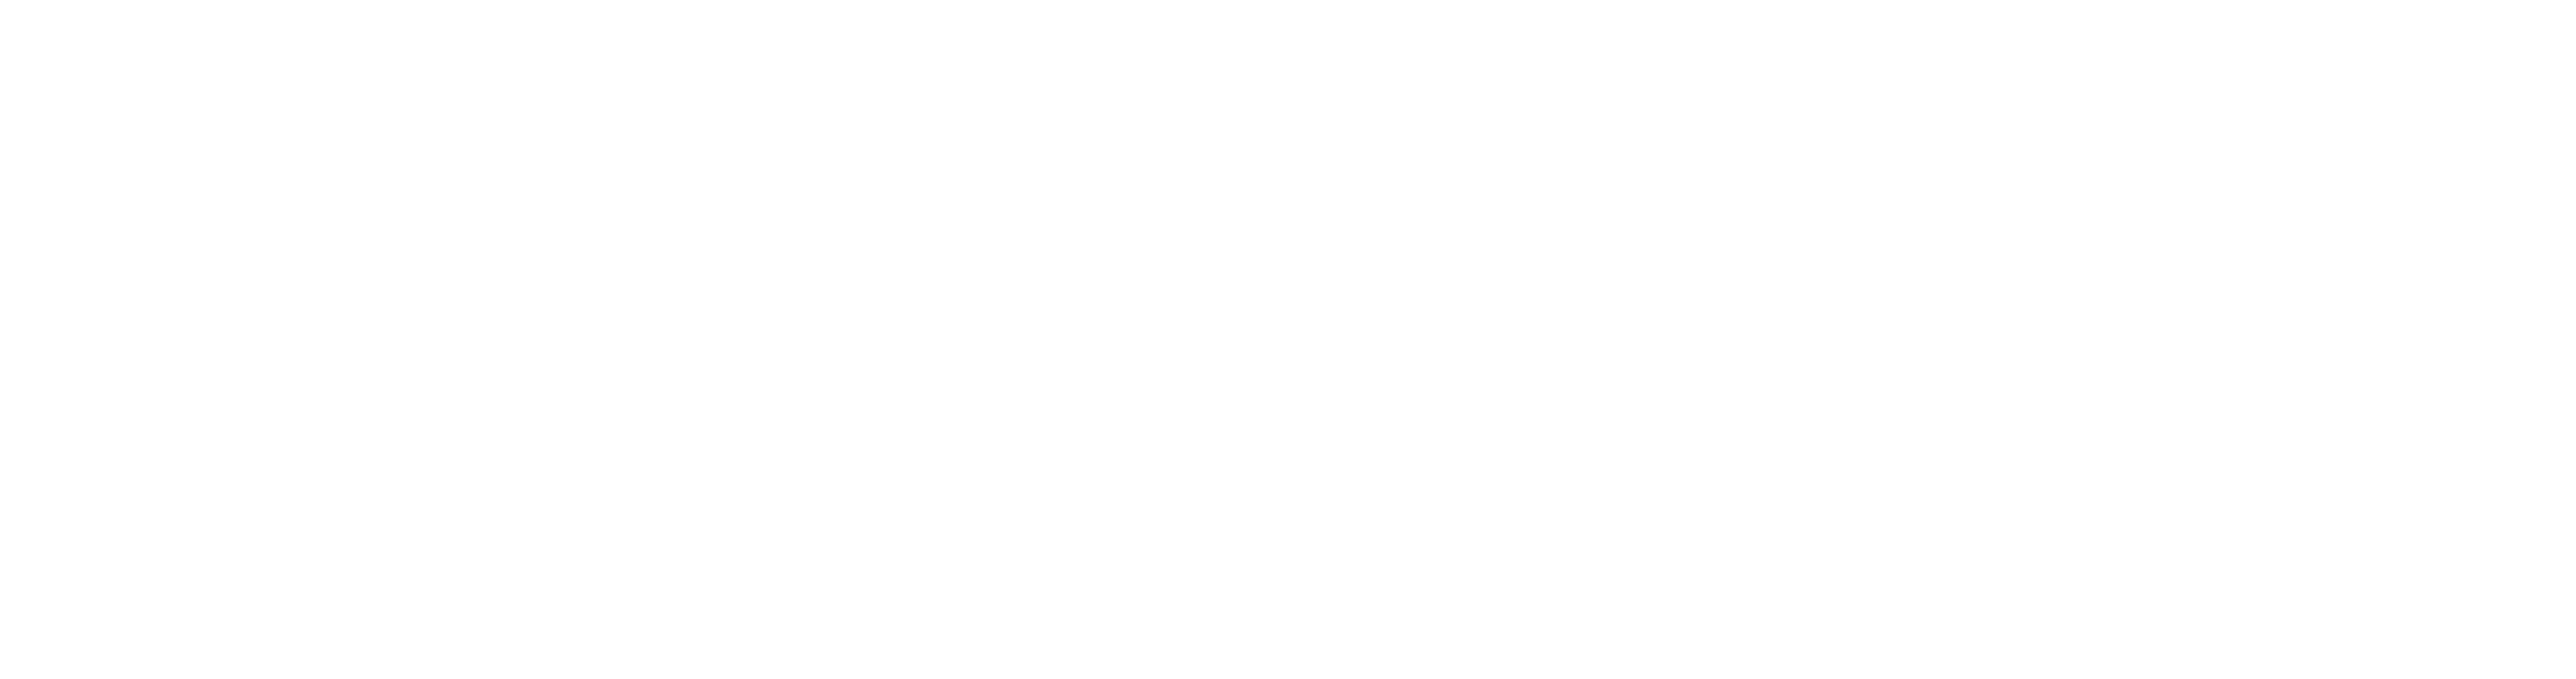 Honor a life lived: Solace obituaries